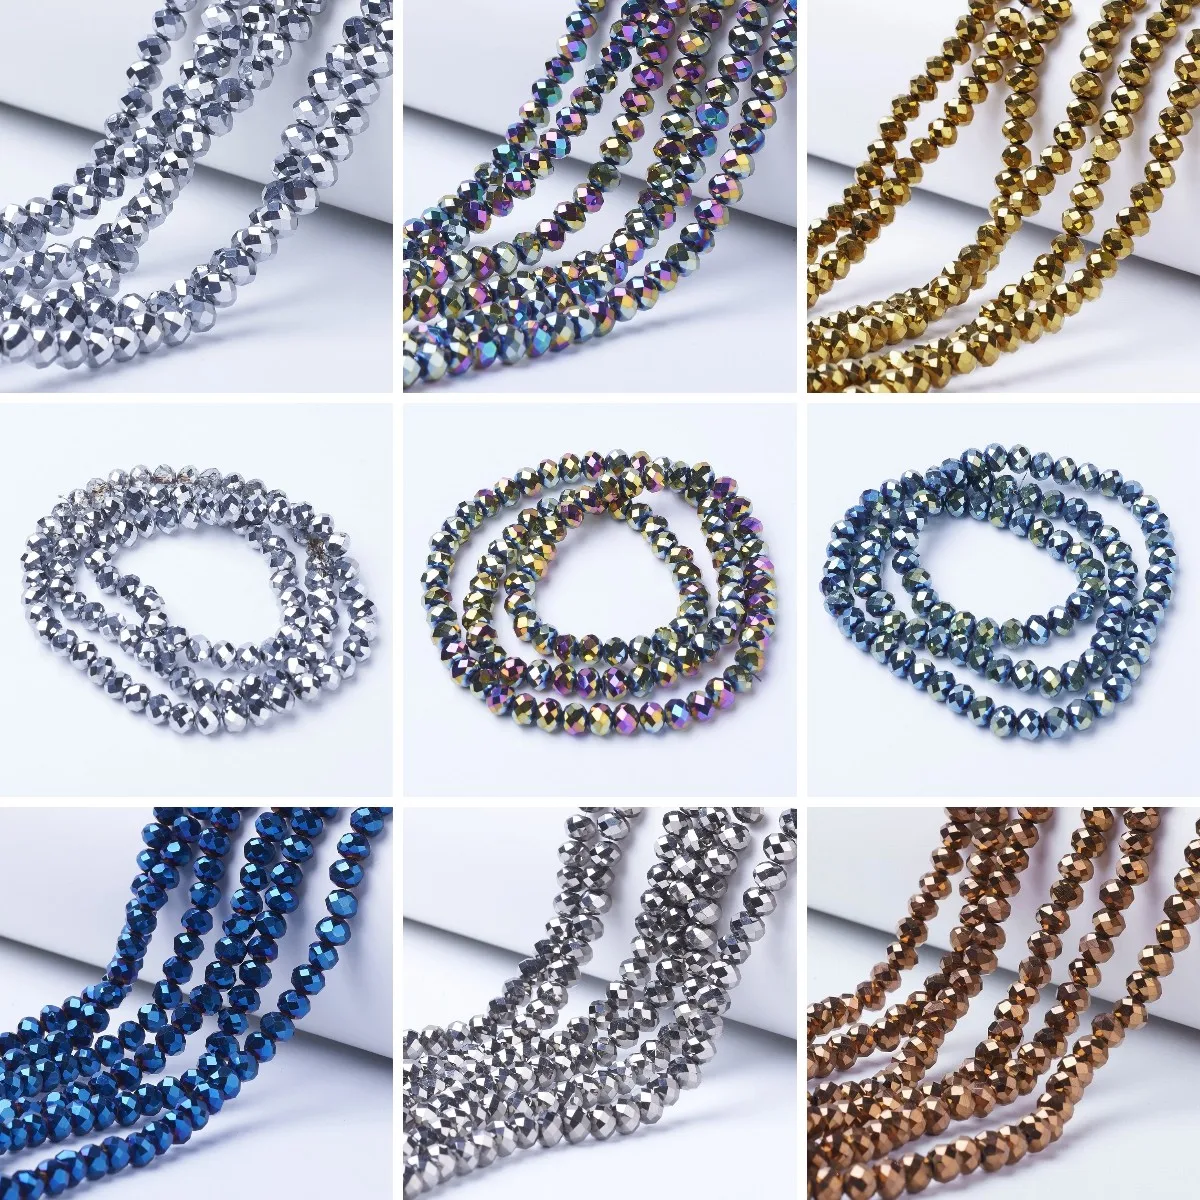 

10 Strands 6mm Faceted Cut Round Ball Plated AB Crystal Glass Beads Loose Bead Rondelle For Bracelet Necklace DIY Jewelry Making